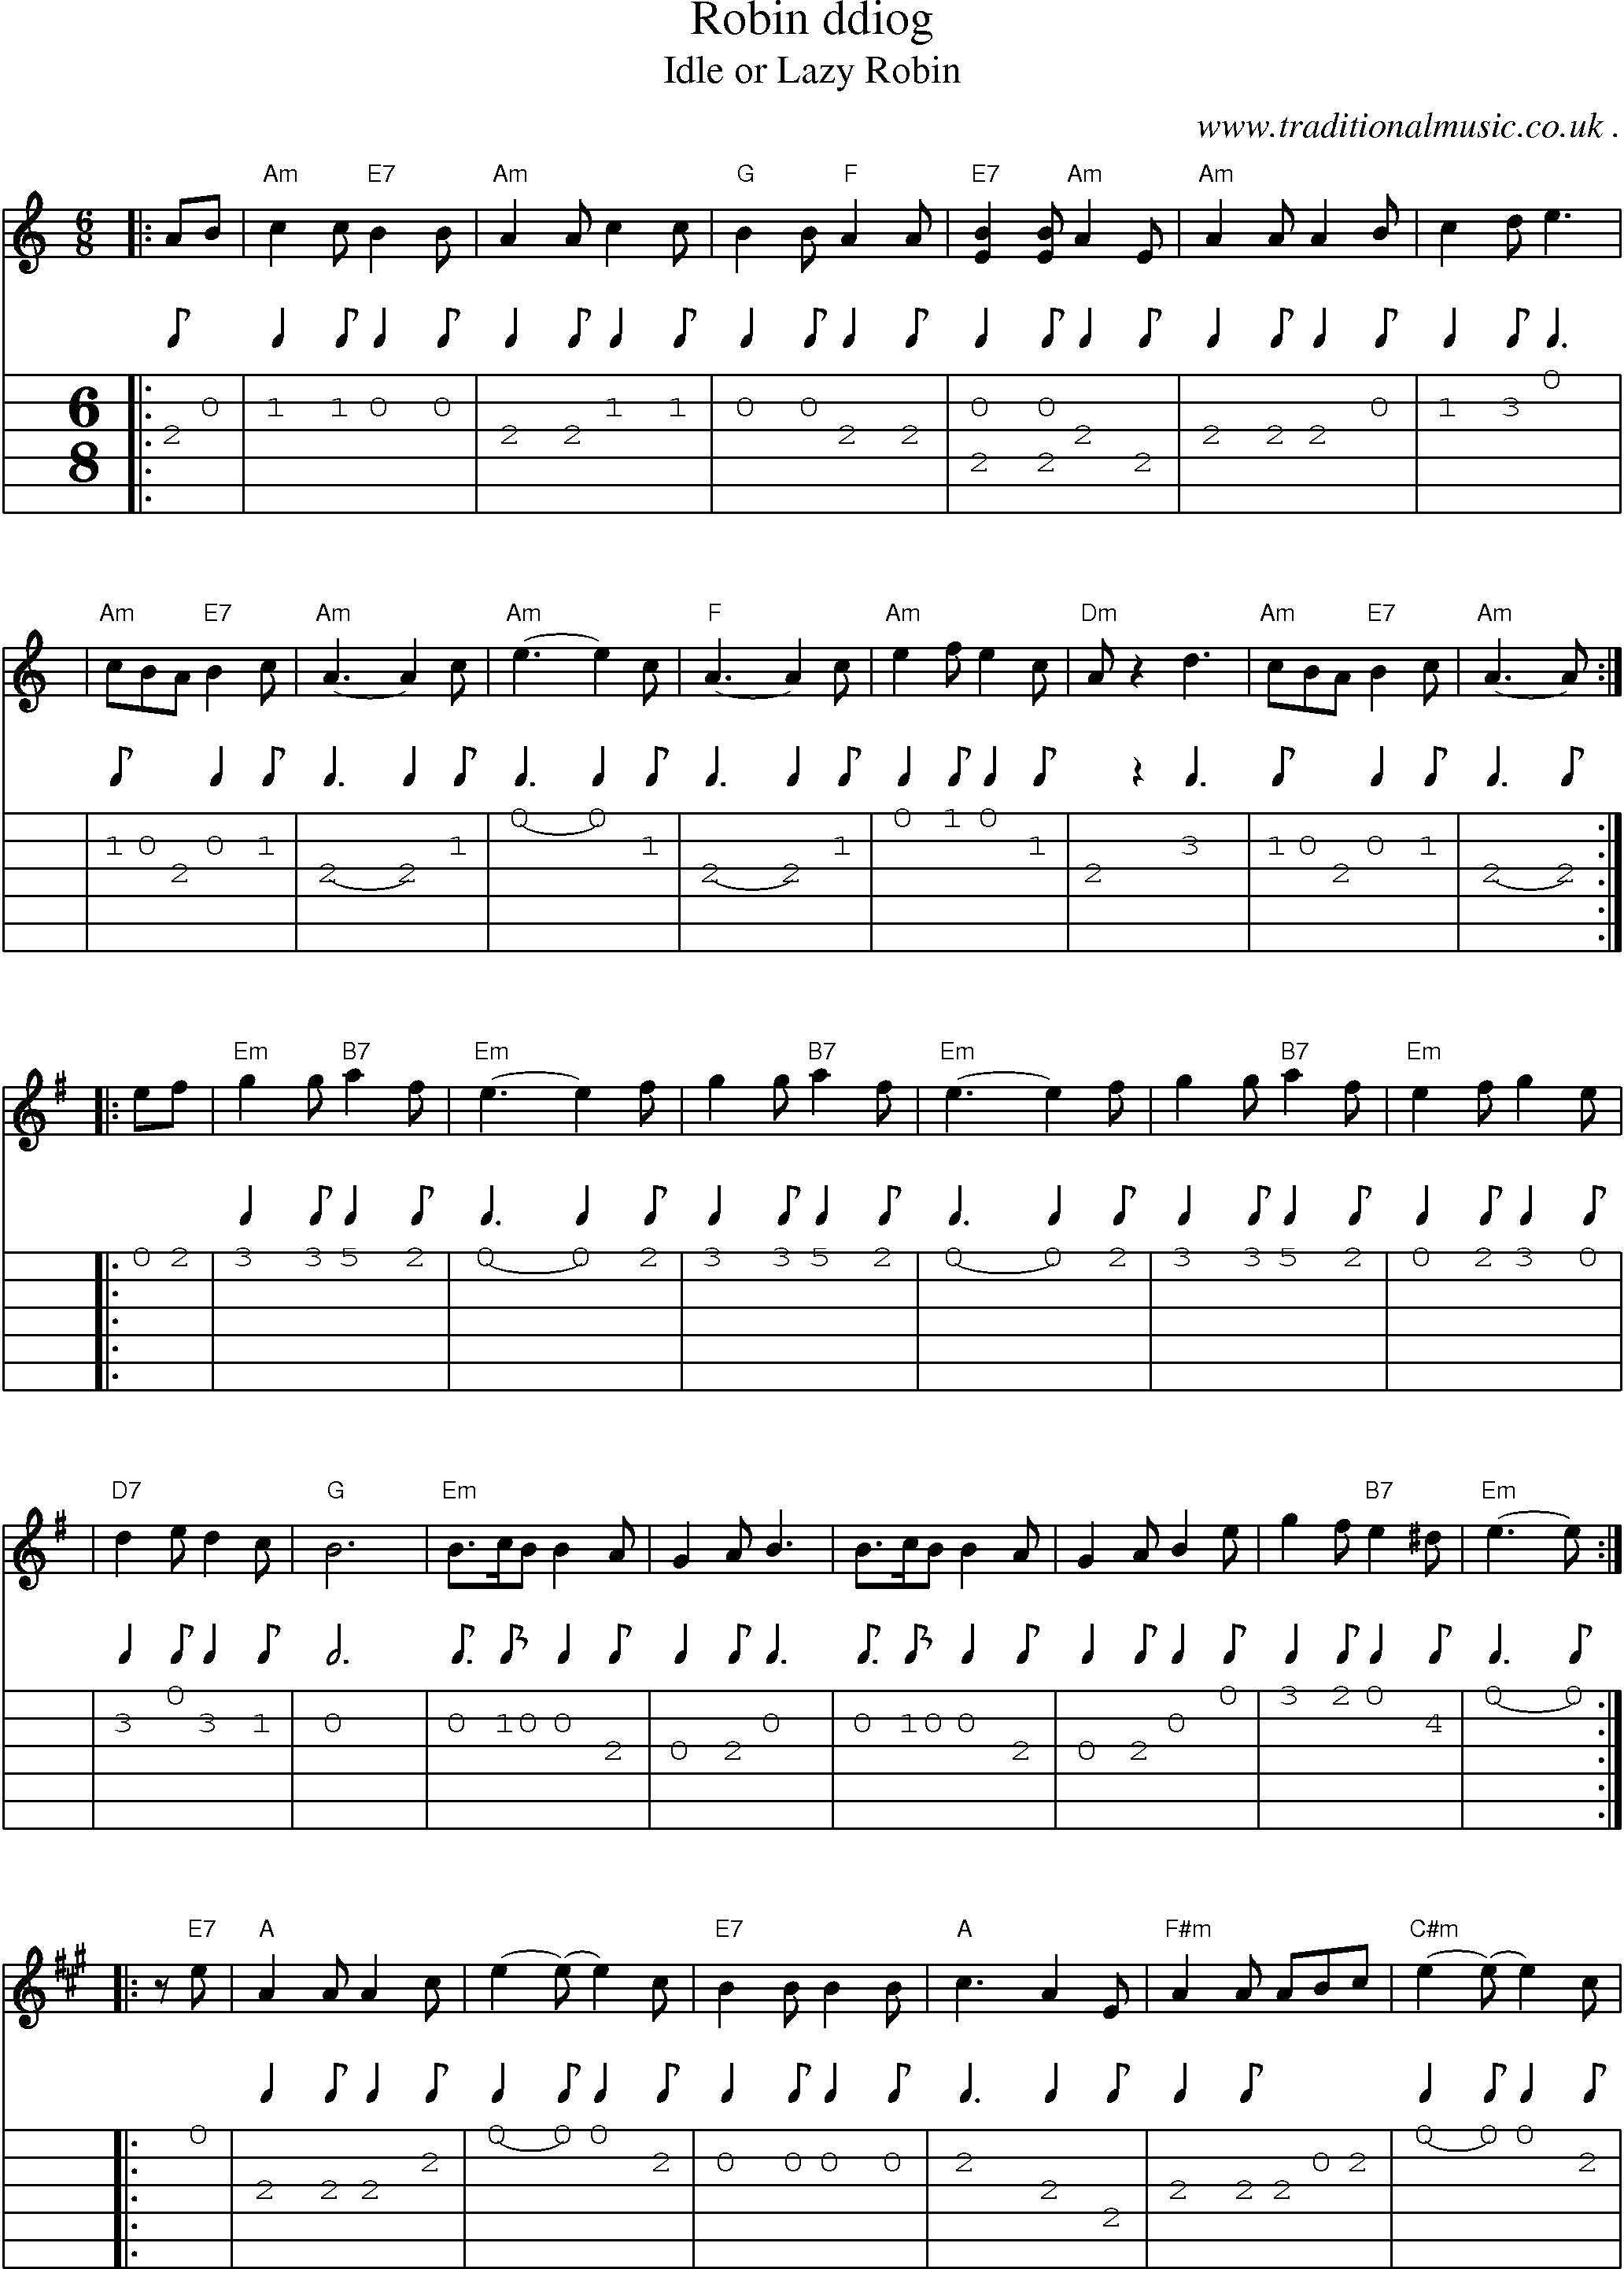 Sheet-music  score, Chords and Guitar Tabs for Robin Ddiog